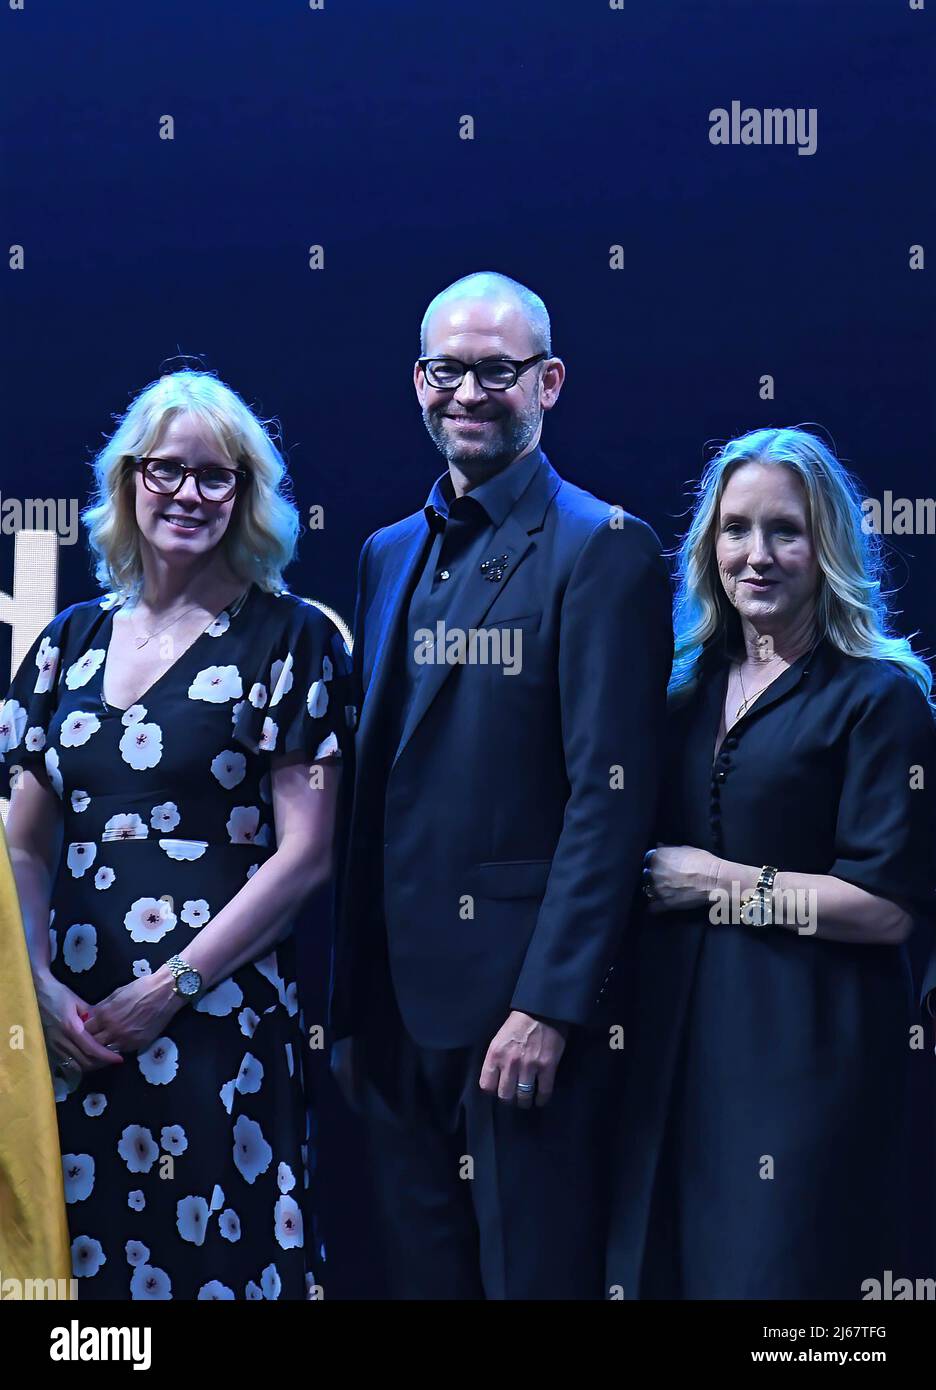 L-R Amazon Prime Video Vice President Kelly Day, James Farell Head of Local  Originals, Amazon Studios and Amazon Prime Video Chief Executive Officer  (CEO) Jennifer Salke pose for a photo during the